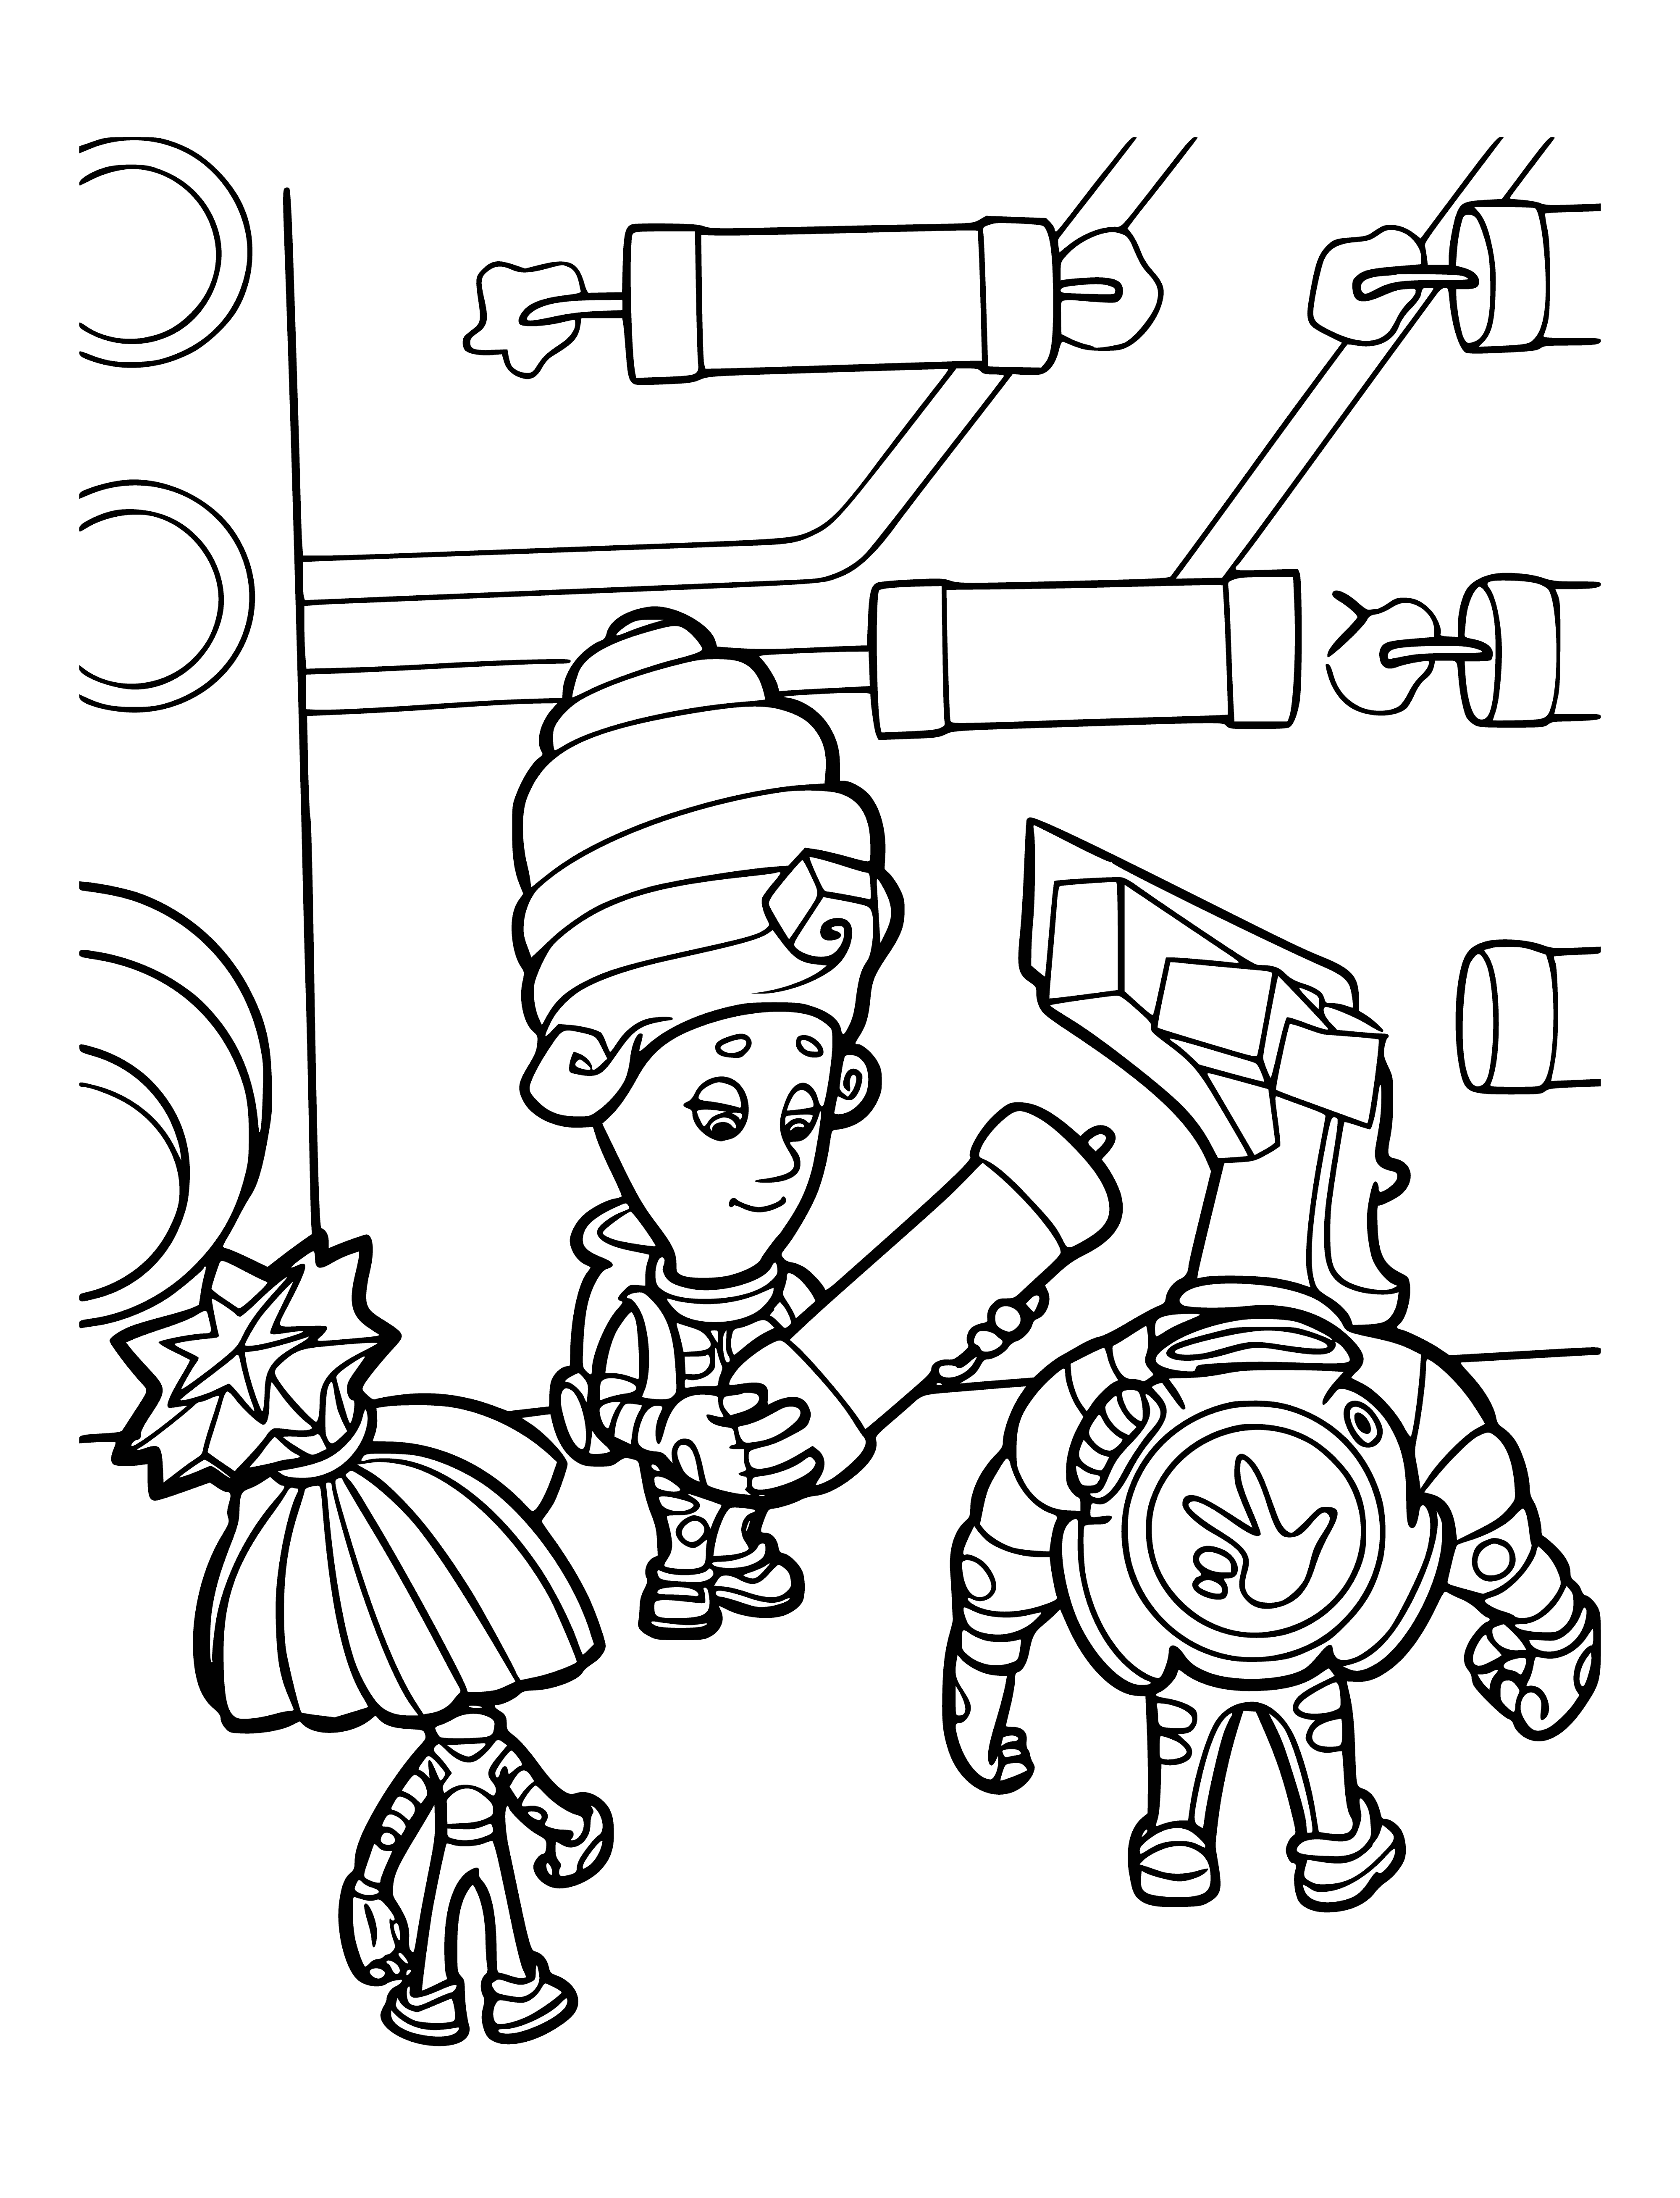 coloring page: 5 Fixies standing in a row on a white background. From L-R: blue eyes & red hat, green eyes & brown hat, yellow eyes & blue hat, brown eye & green hat, blue eye & yellow hat.